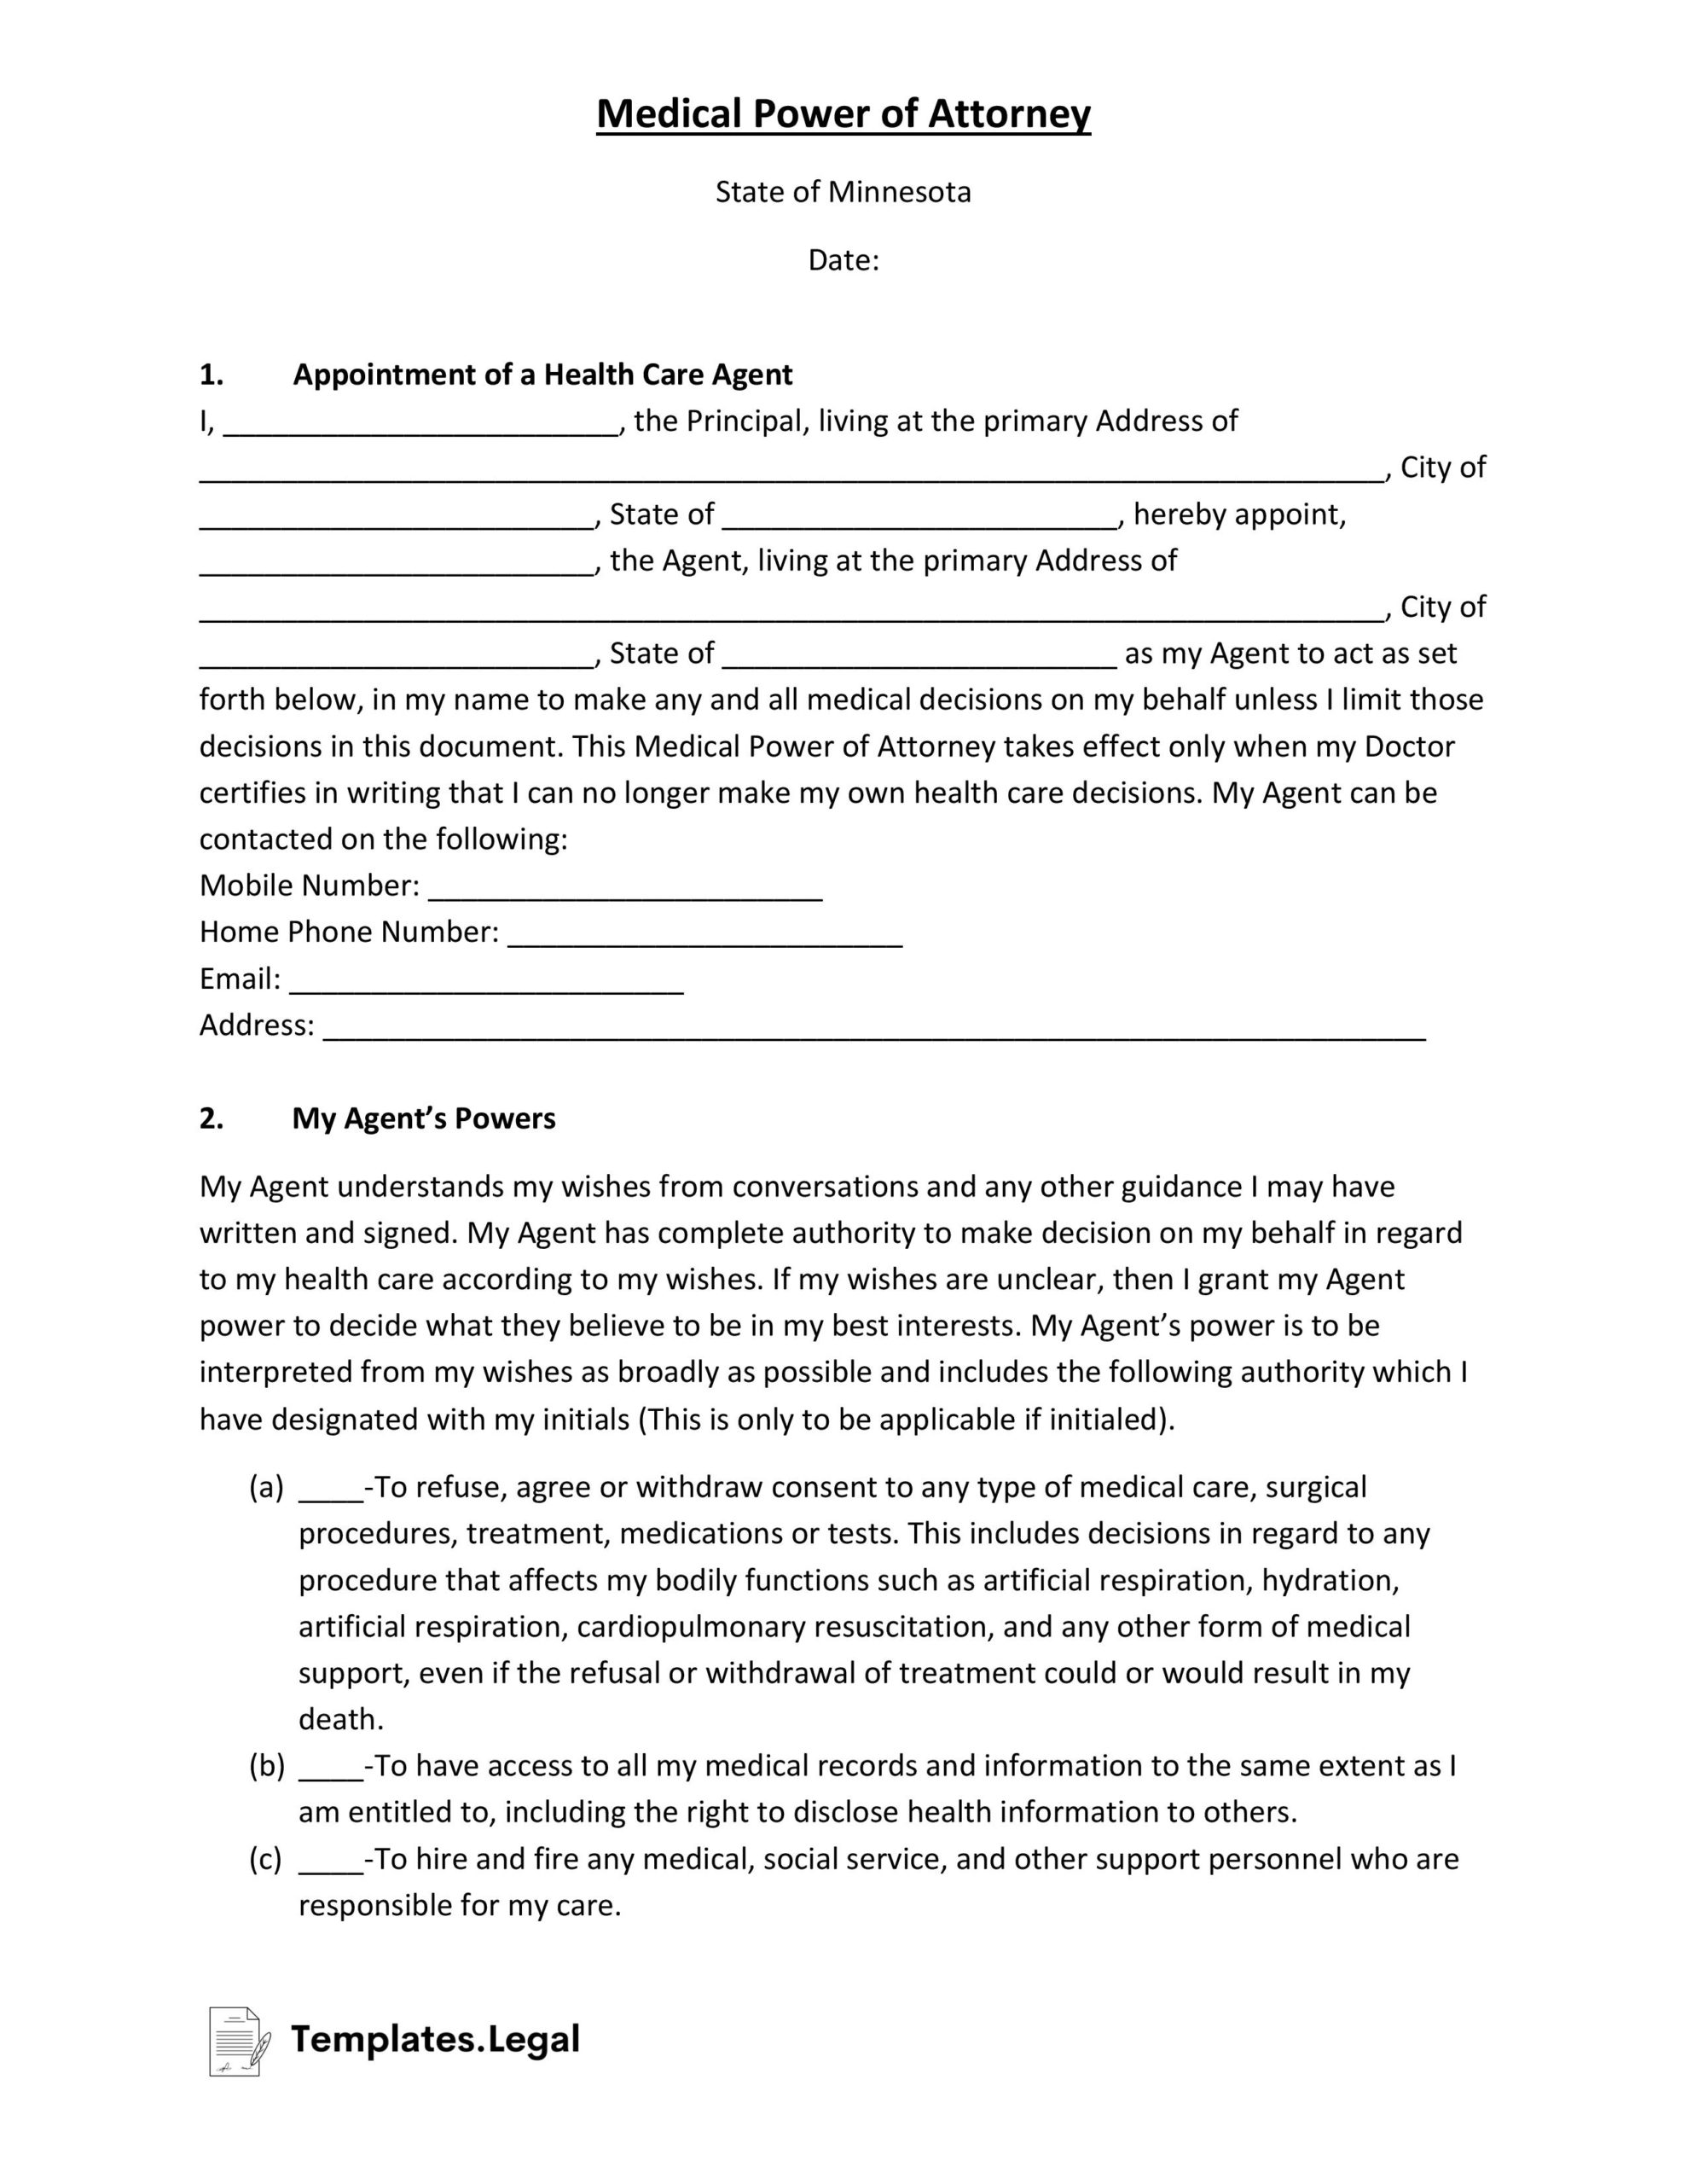 Minnesota Medical Power of Attorney- Templates.Legal